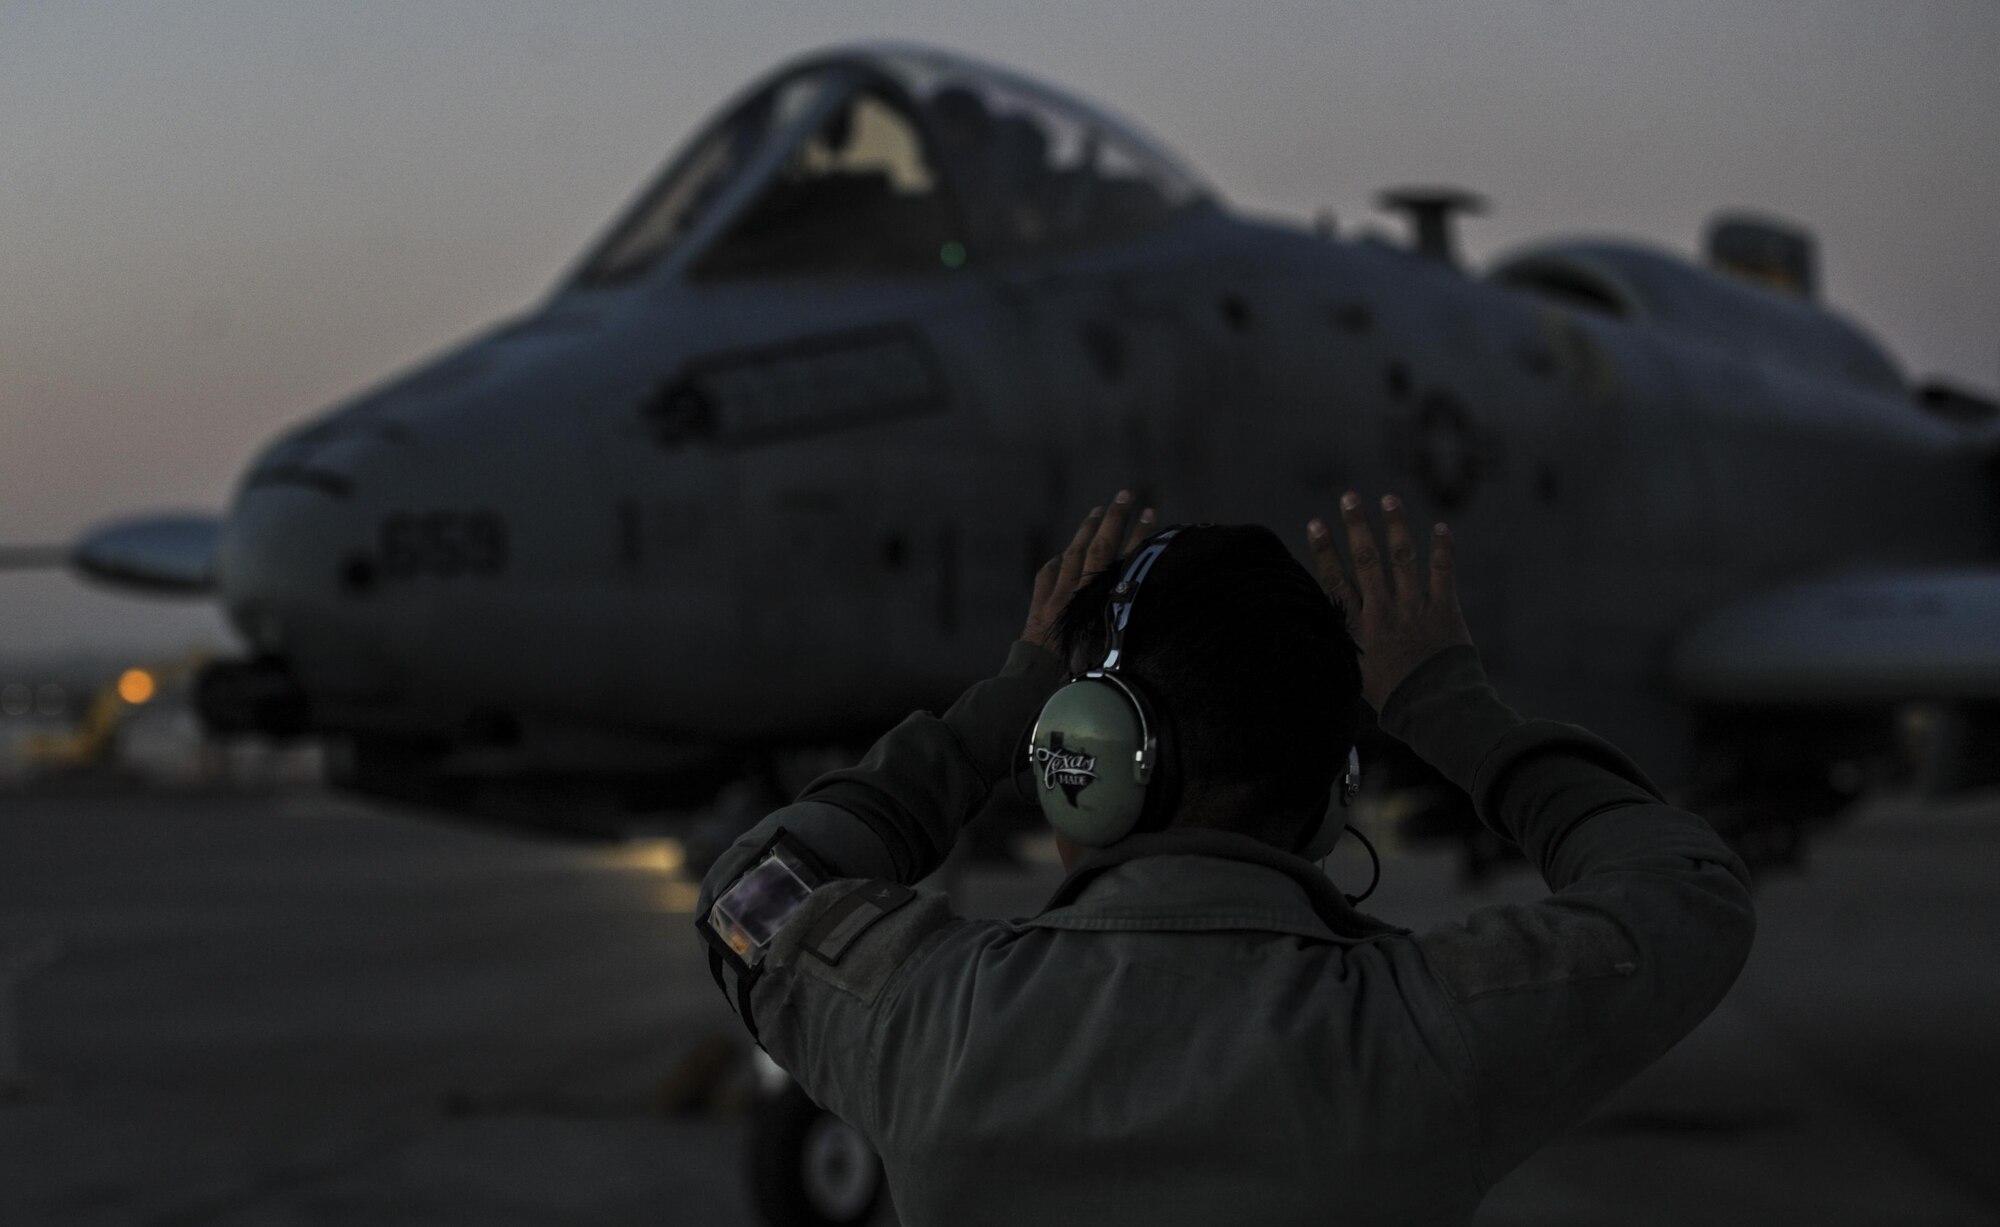 Senior Airman Scott Martinez, 355th Aircraft Maintenance Squadron crew chief, Davis-Monthan Air Force Base, Ariz., signals to an A-10 Thunderbolt II as the pilot taxis down the runway at Nellis Air Force Base, Nev., Oct. 4, 2016. The 357th Fighter Squadron is participating in a realistic air-land integration combat training exercise involving air forces of the U. S. and its allies. (U.S. Air Force photo by Airman 1st Class Kevin Tanenbaum/Released)